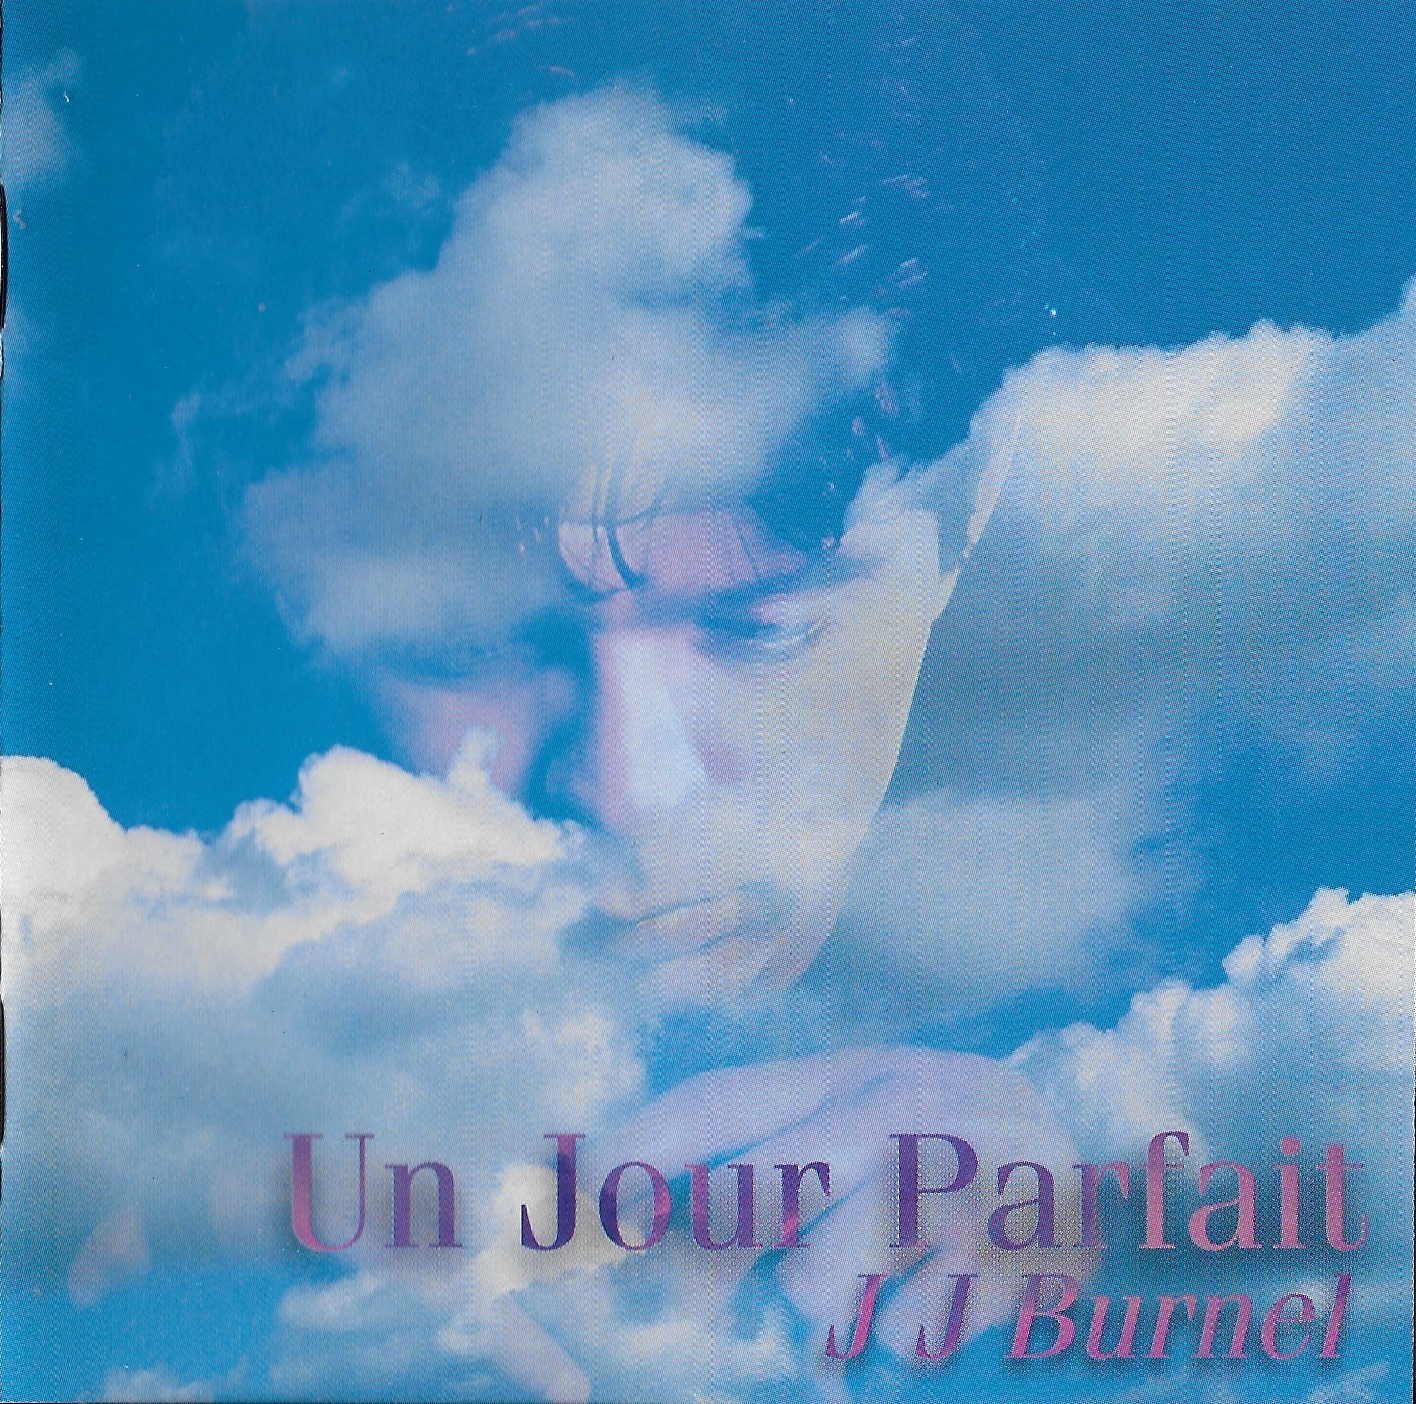 Picture of Un jour parfait by artist Jean Jacques Burnel from The Stranglers cds